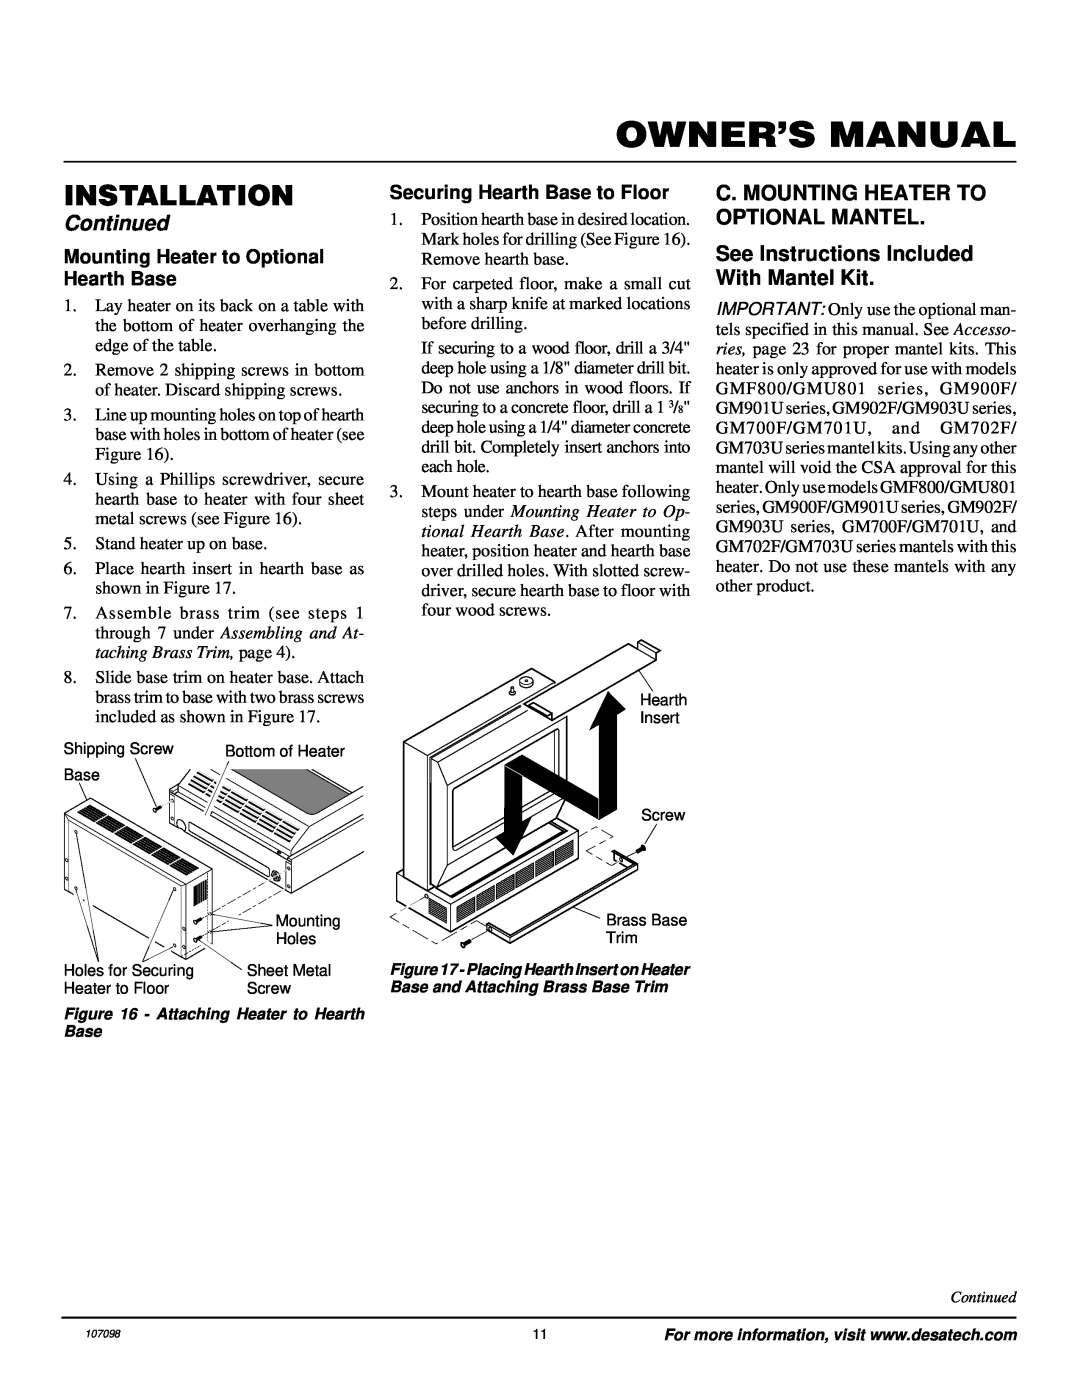 Vanguard Heating VMH3000TPA C. Mounting Heater To Optional Mantel, See Instructions Included With Mantel Kit, Installation 